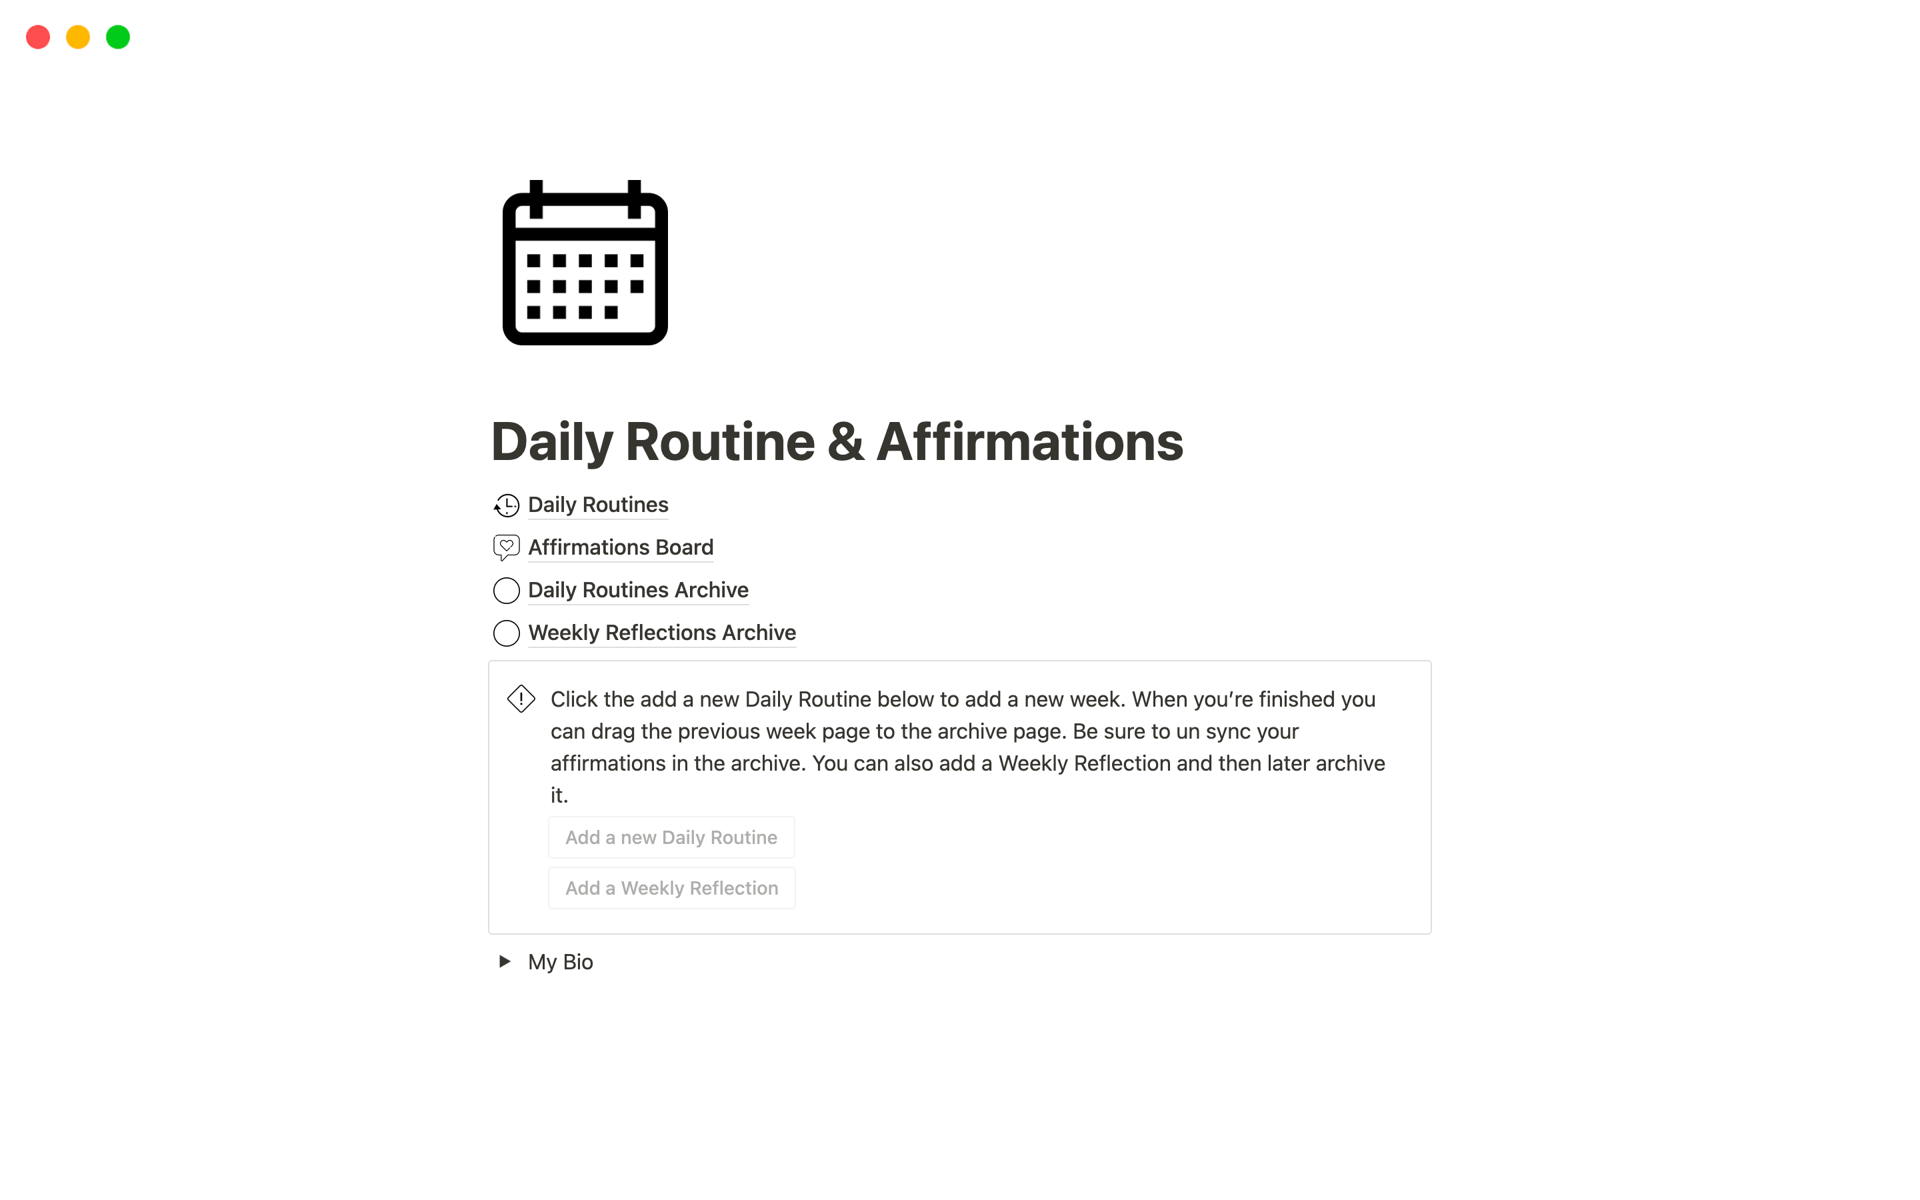 This functional Daily Routines and Affirmations template will streamline your daily schedule, allowing you to structure your day efficiently, customize daily affirmations, and stay on top of tasks and goals.